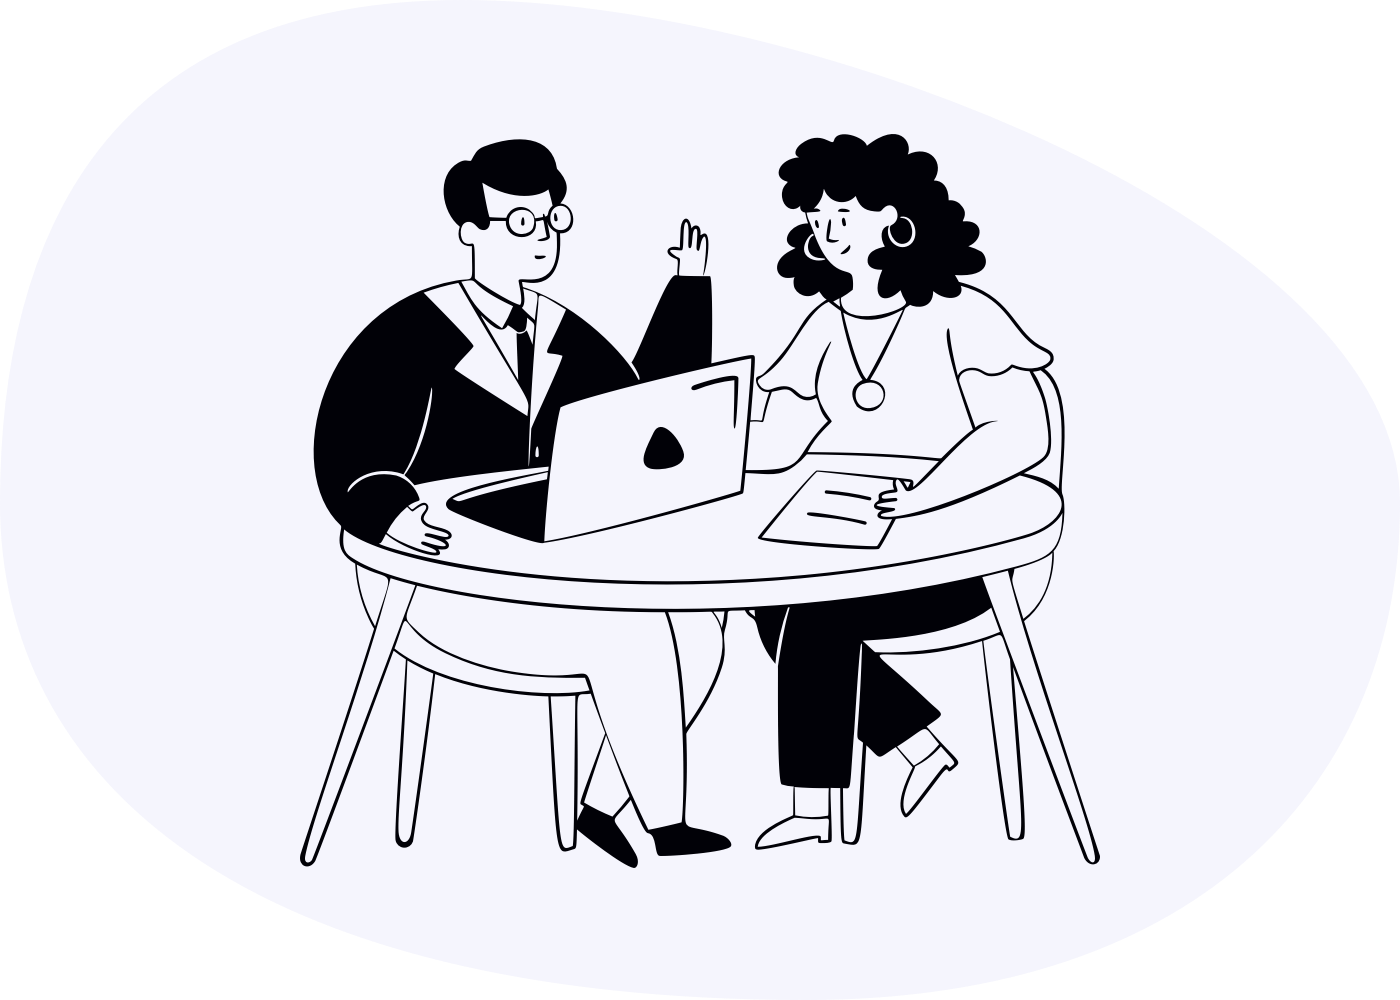 Illustration of a man and woman sat at a desk using a laptop